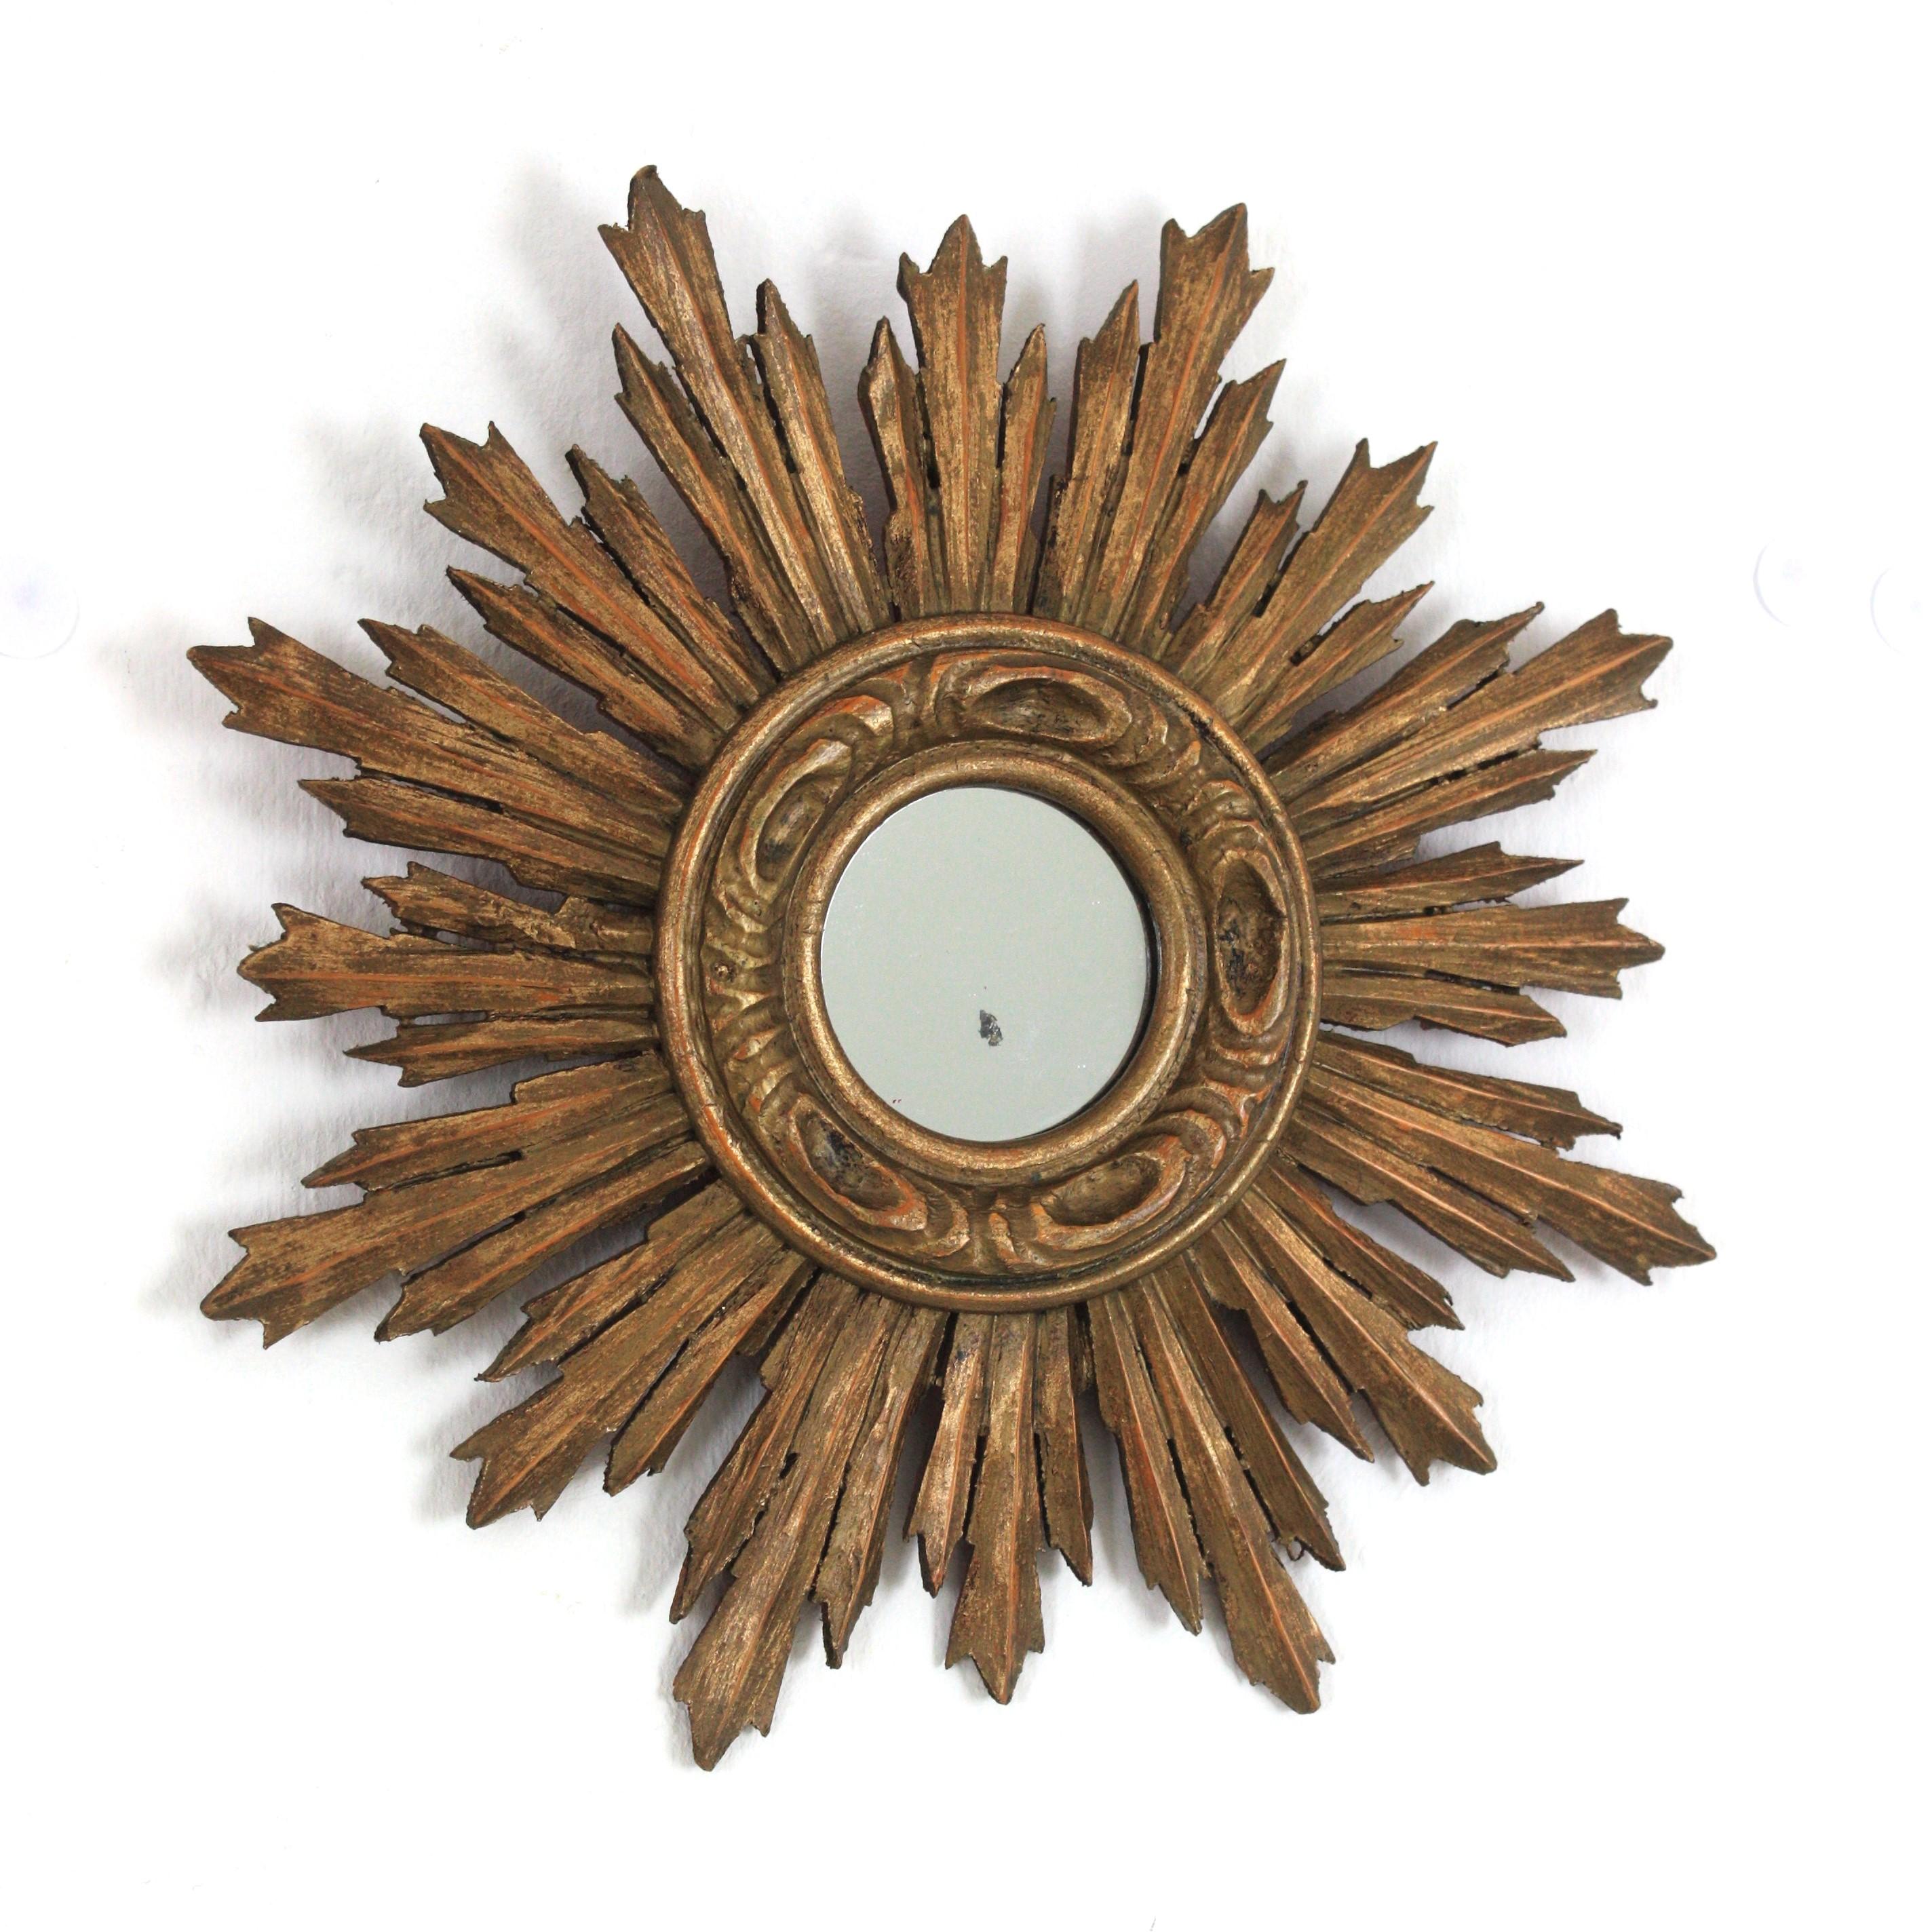 Spanish Baroque Style Mini Giltwood Sunburst Mirror , 1940s-1950s
Lovely Baroque style mini sized giltwood sunburst mirror with gold leaf finish. 
This gorgeous miniature sunburst mirror has a frame comprised by rays in different sizes and a ring